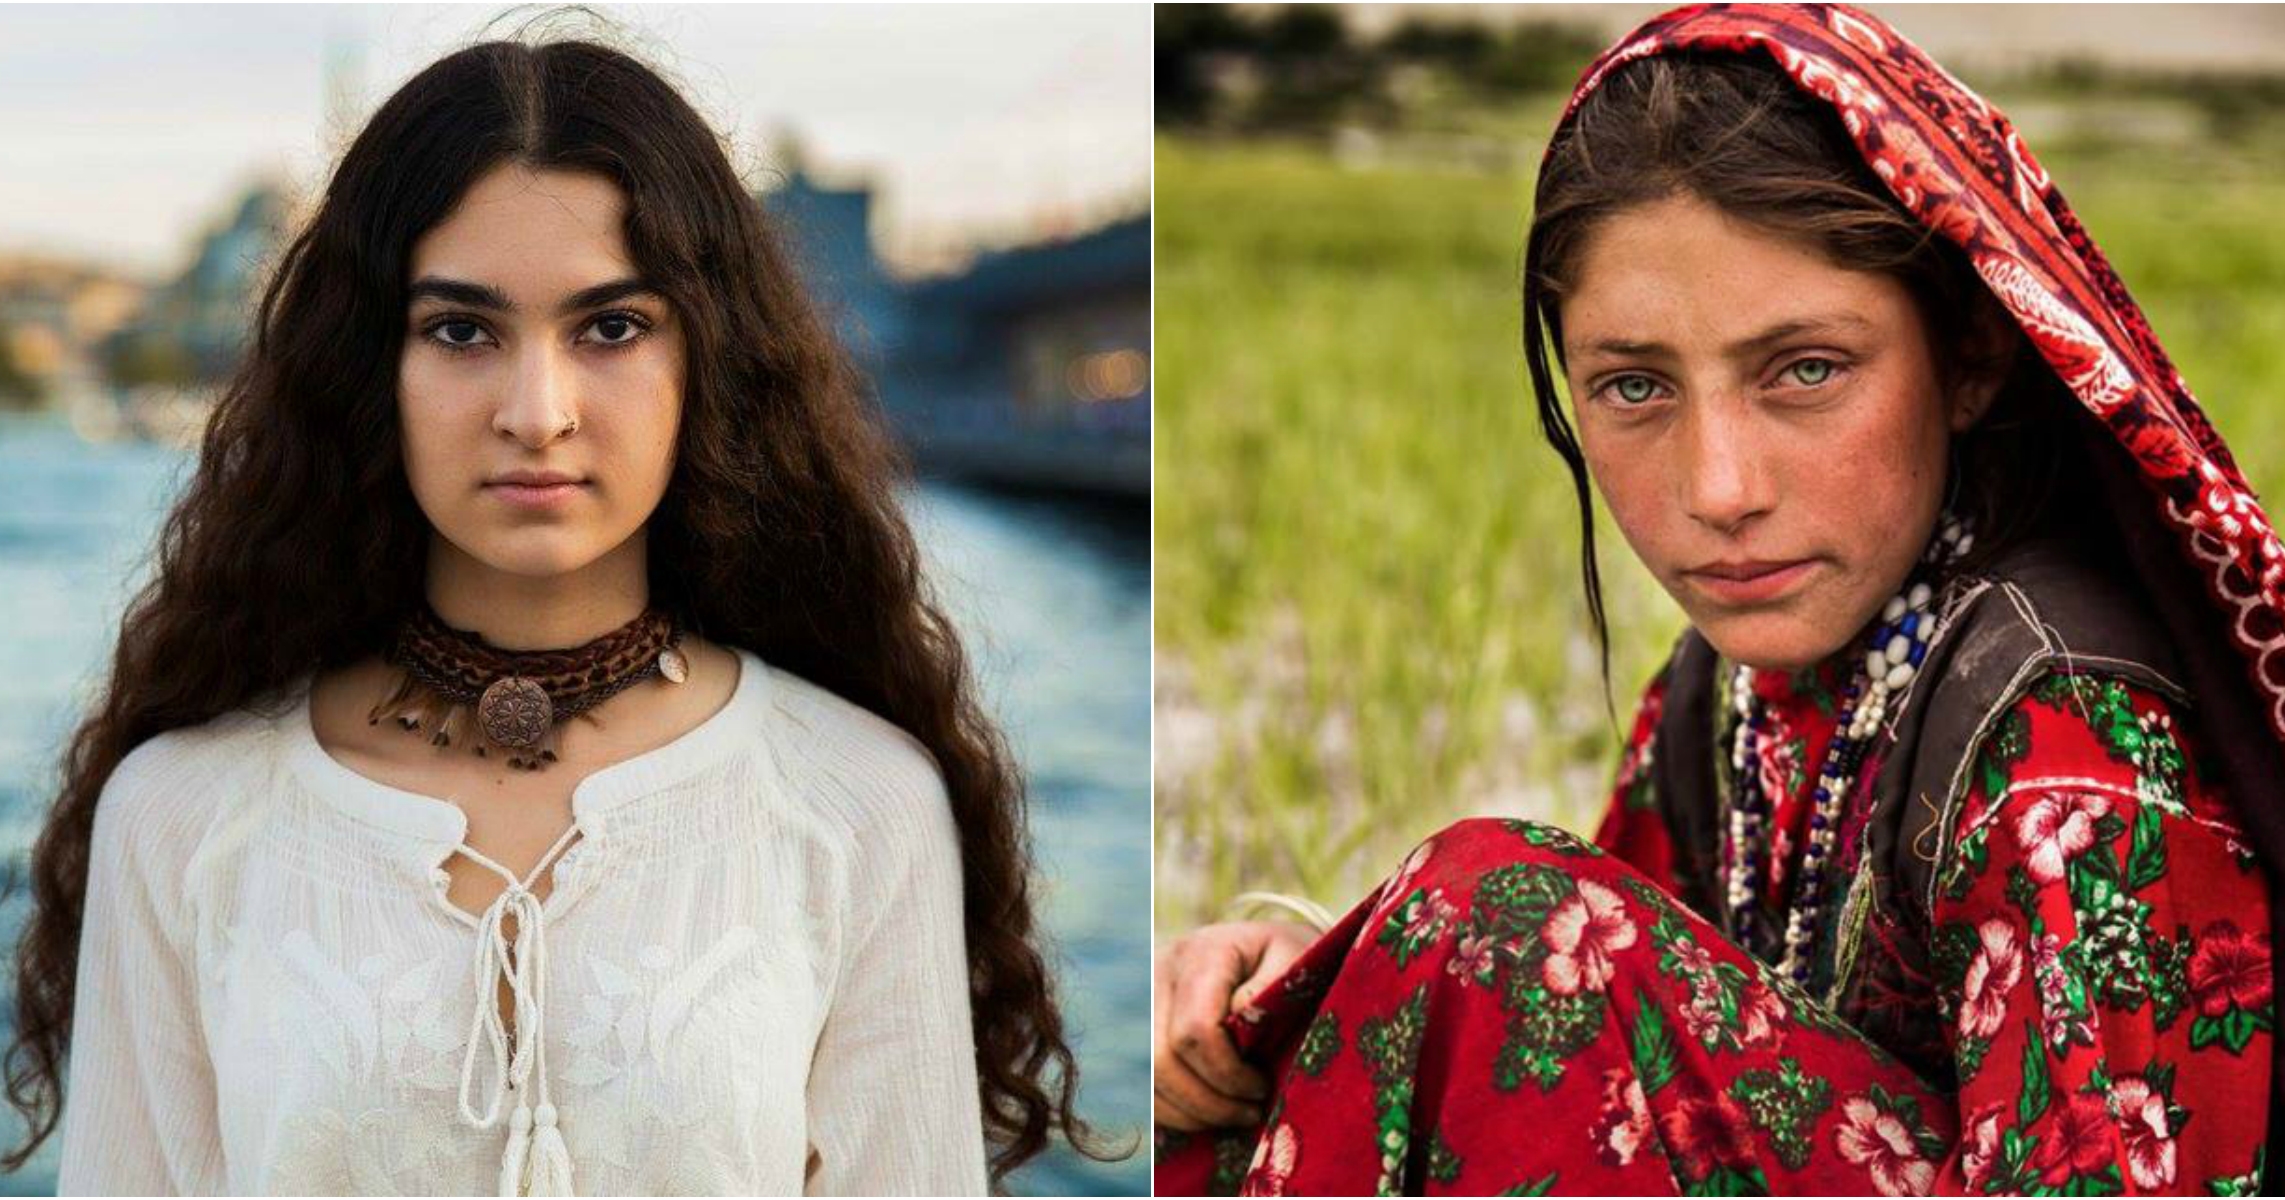 17 Images Of Women From Around The World That Prove Beauty Lies In